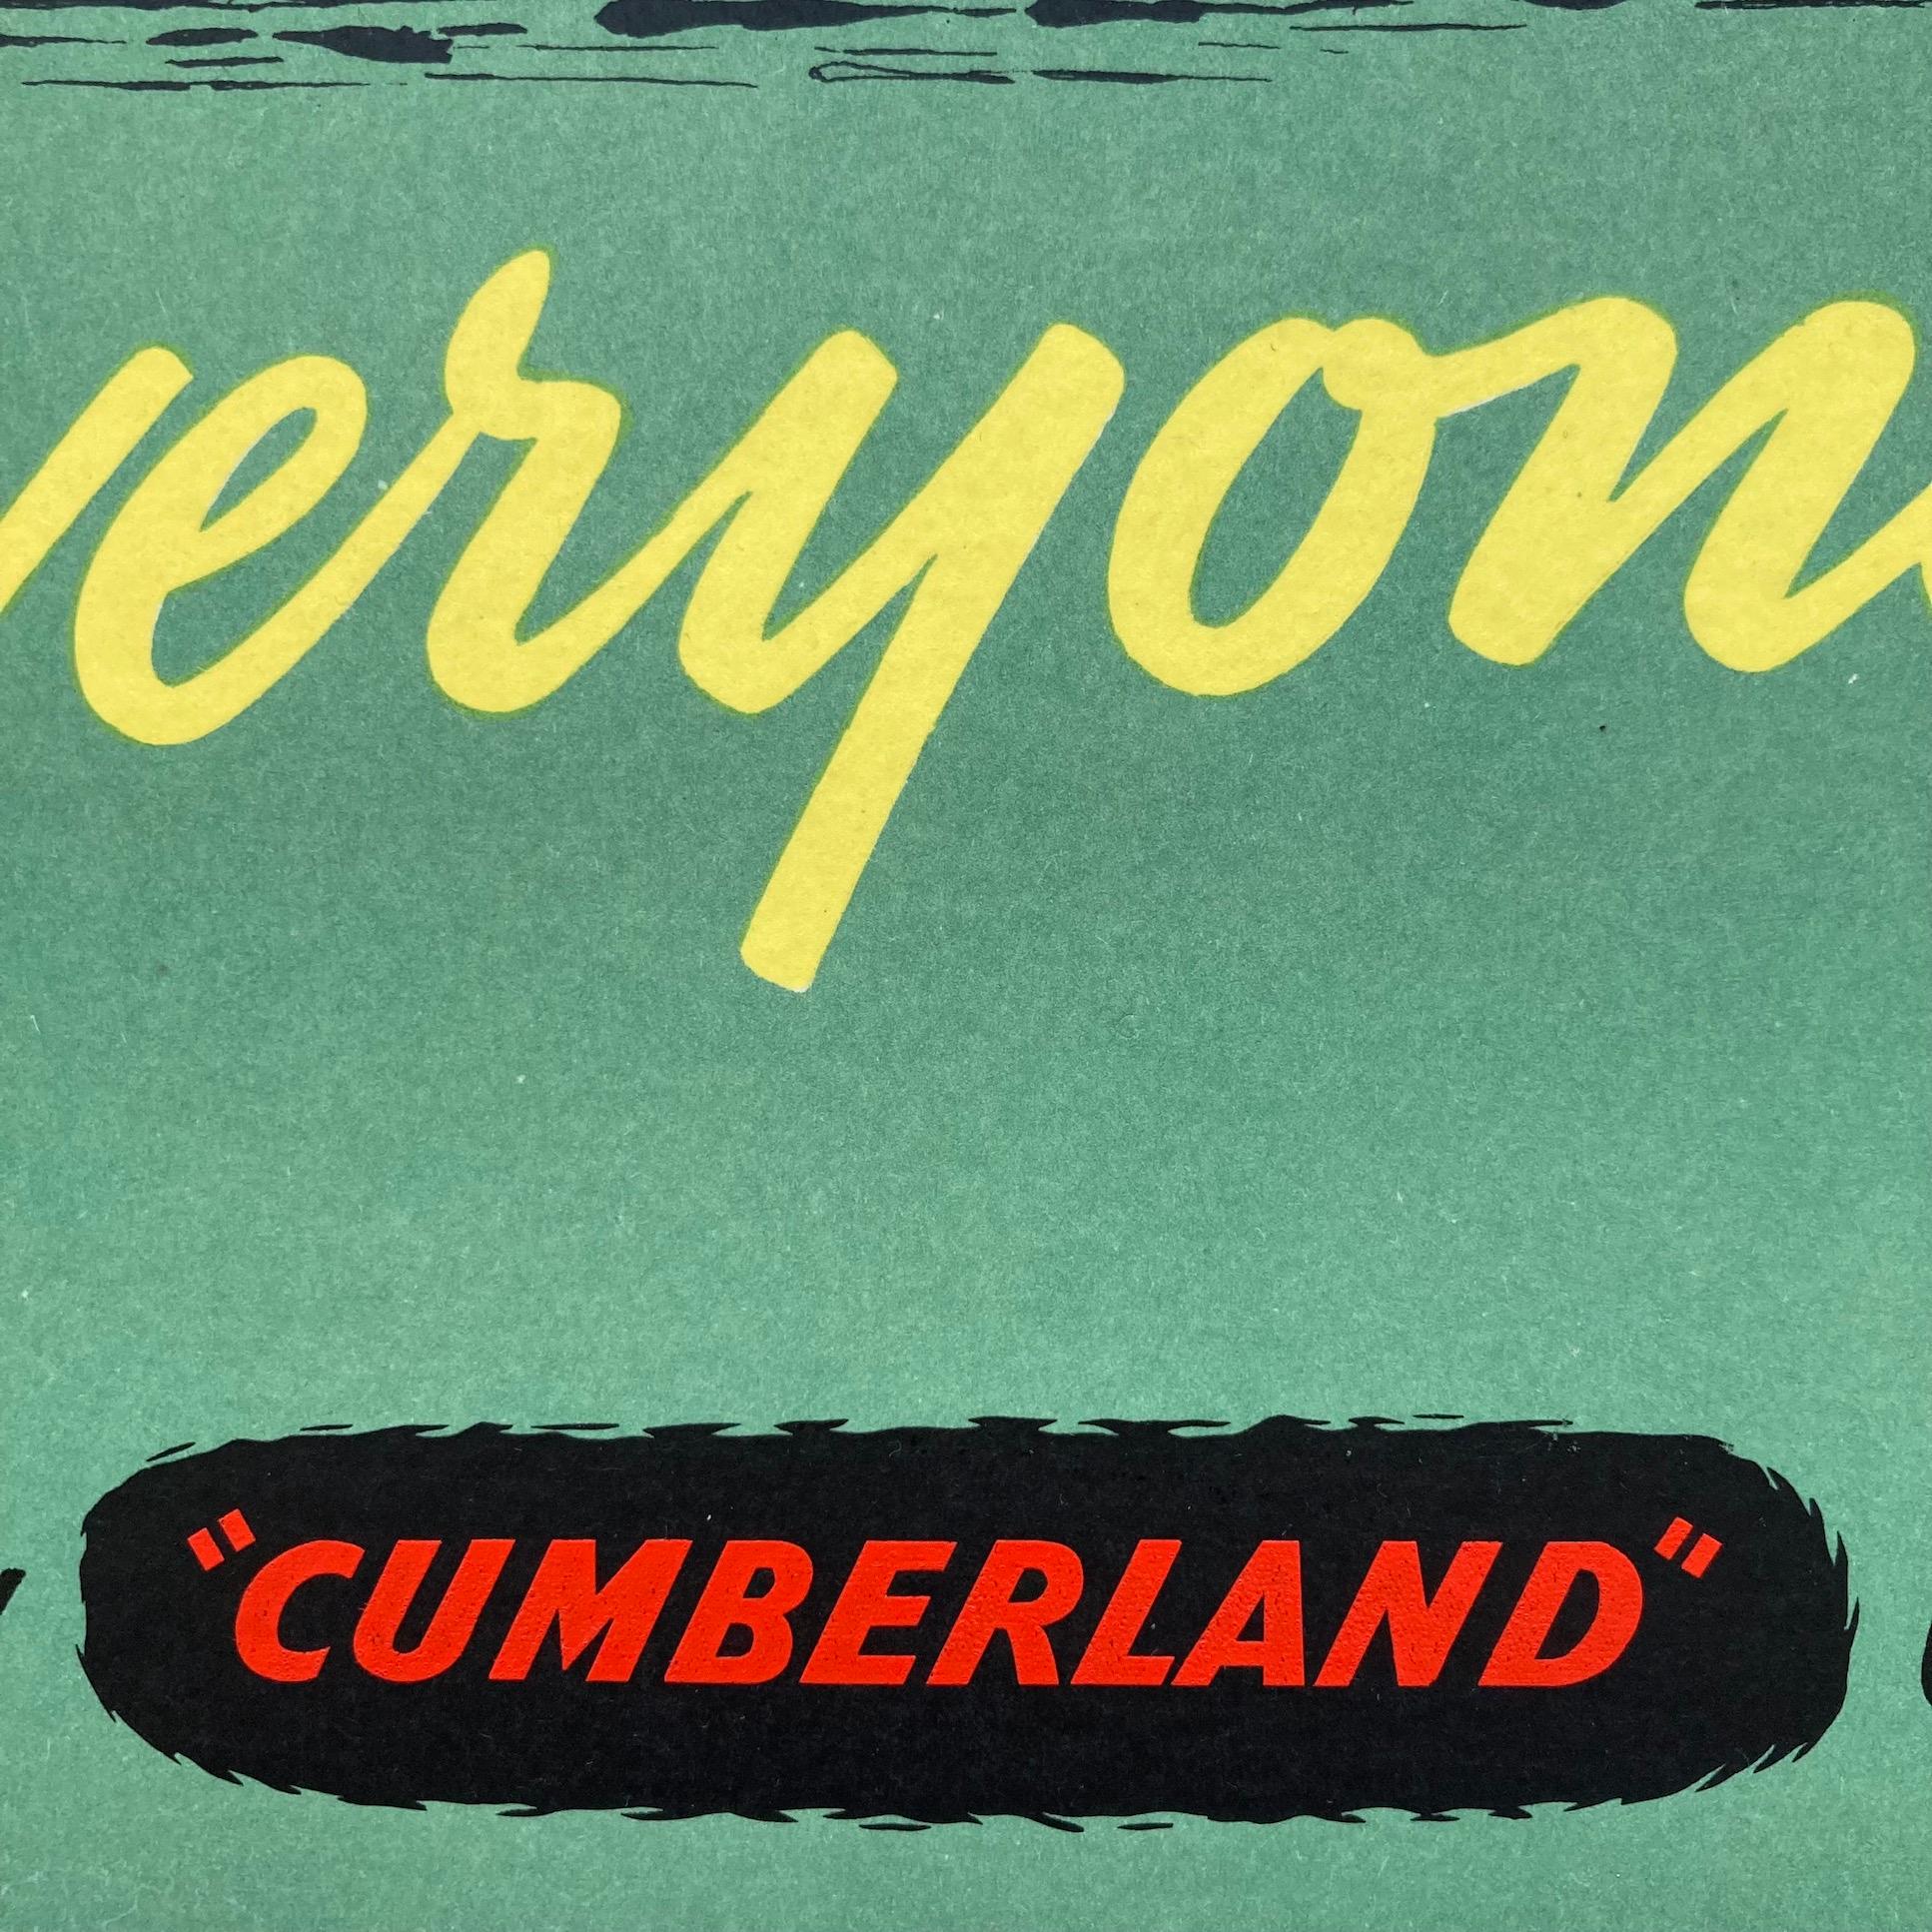 Original English 1960's bus panel poster promoting tours through Cumberland transport services. This rare poster would have been displayed in a UK travel bureau or in a bus or coach serving routes around Britain. 
Studio Seven designed numerous